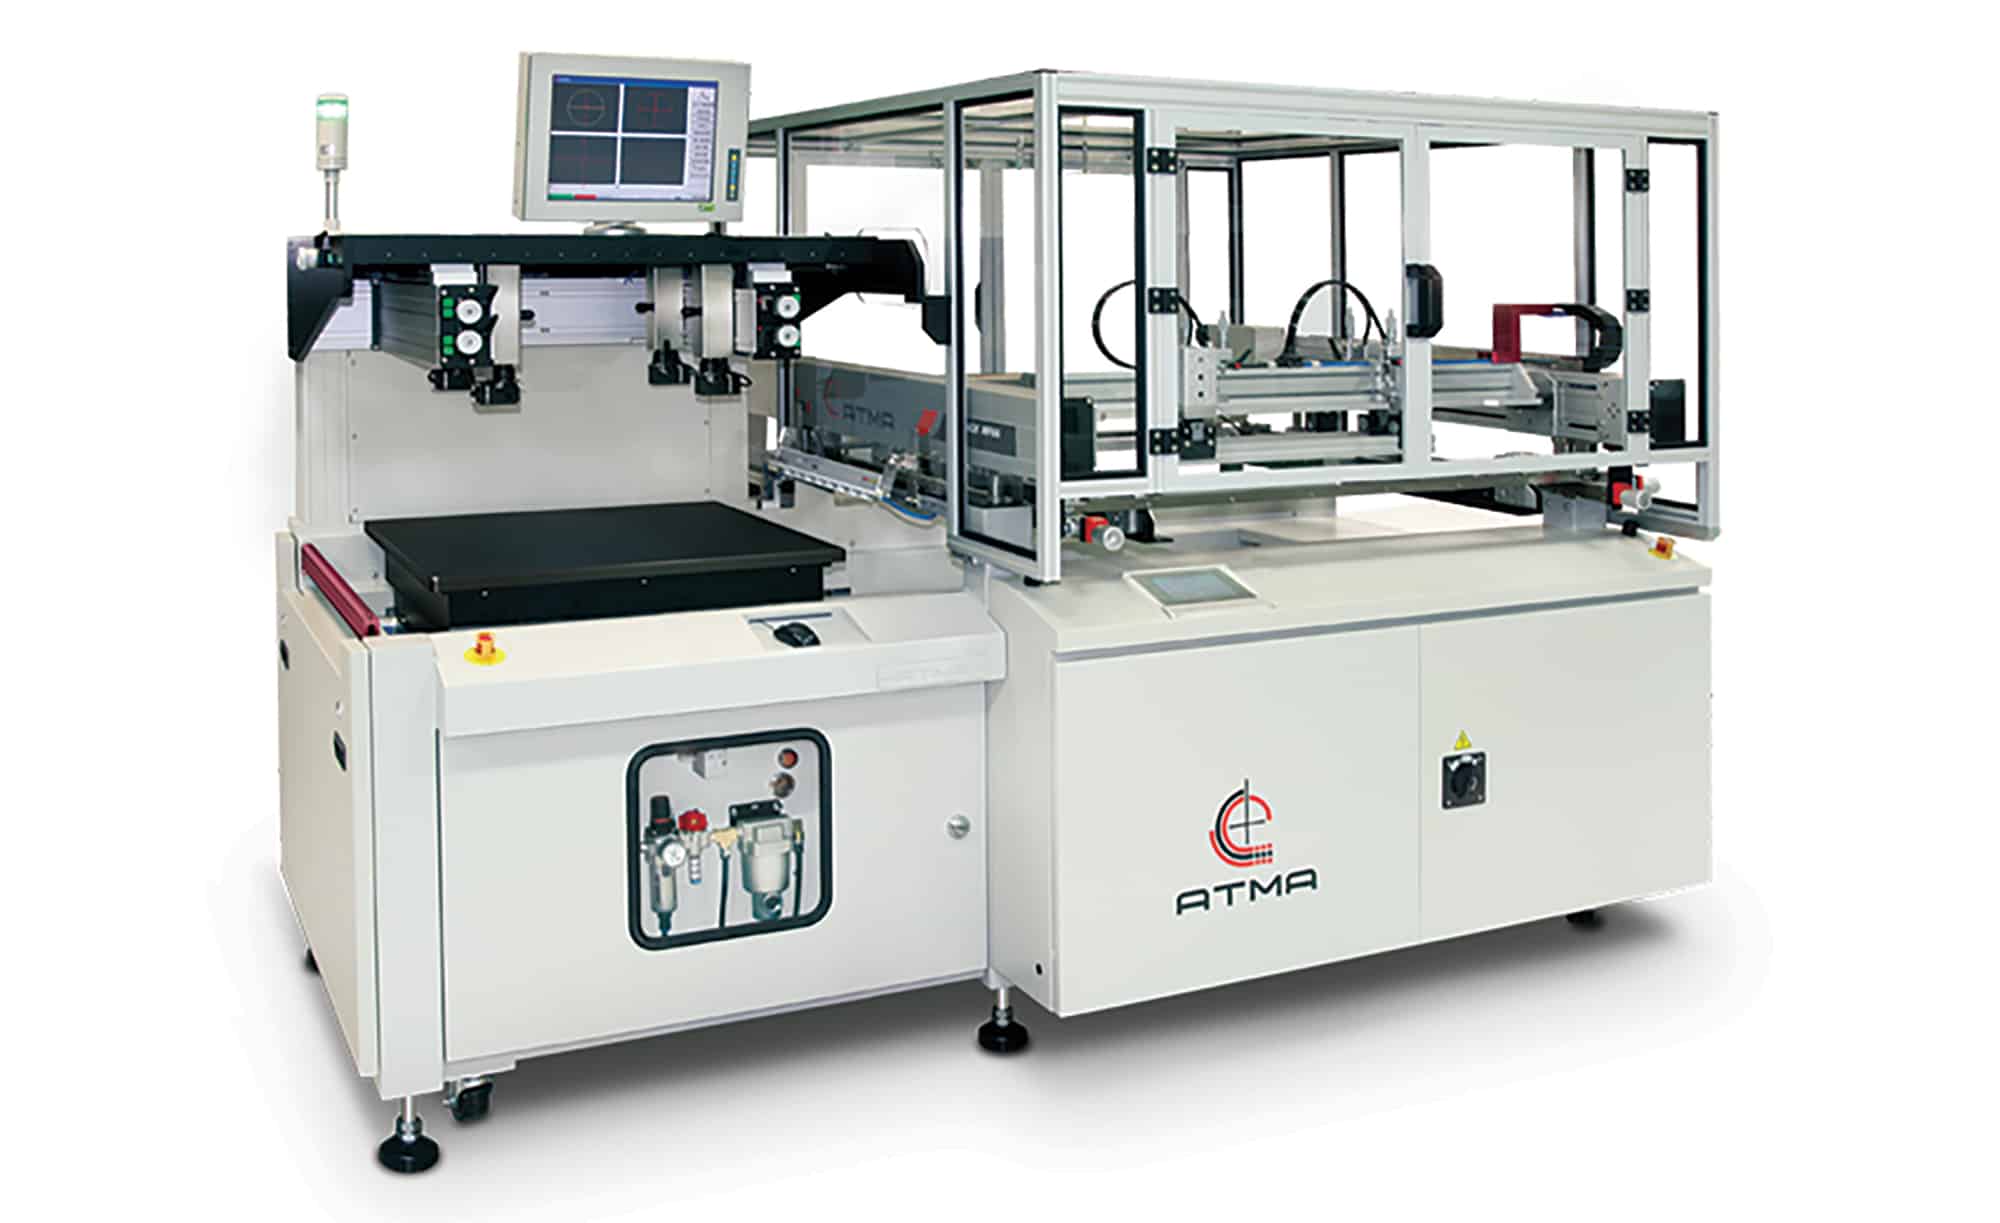 Modern screen printers use automated presses; this one features a CCTV registration system. Photo courtesy of RH Solutions.